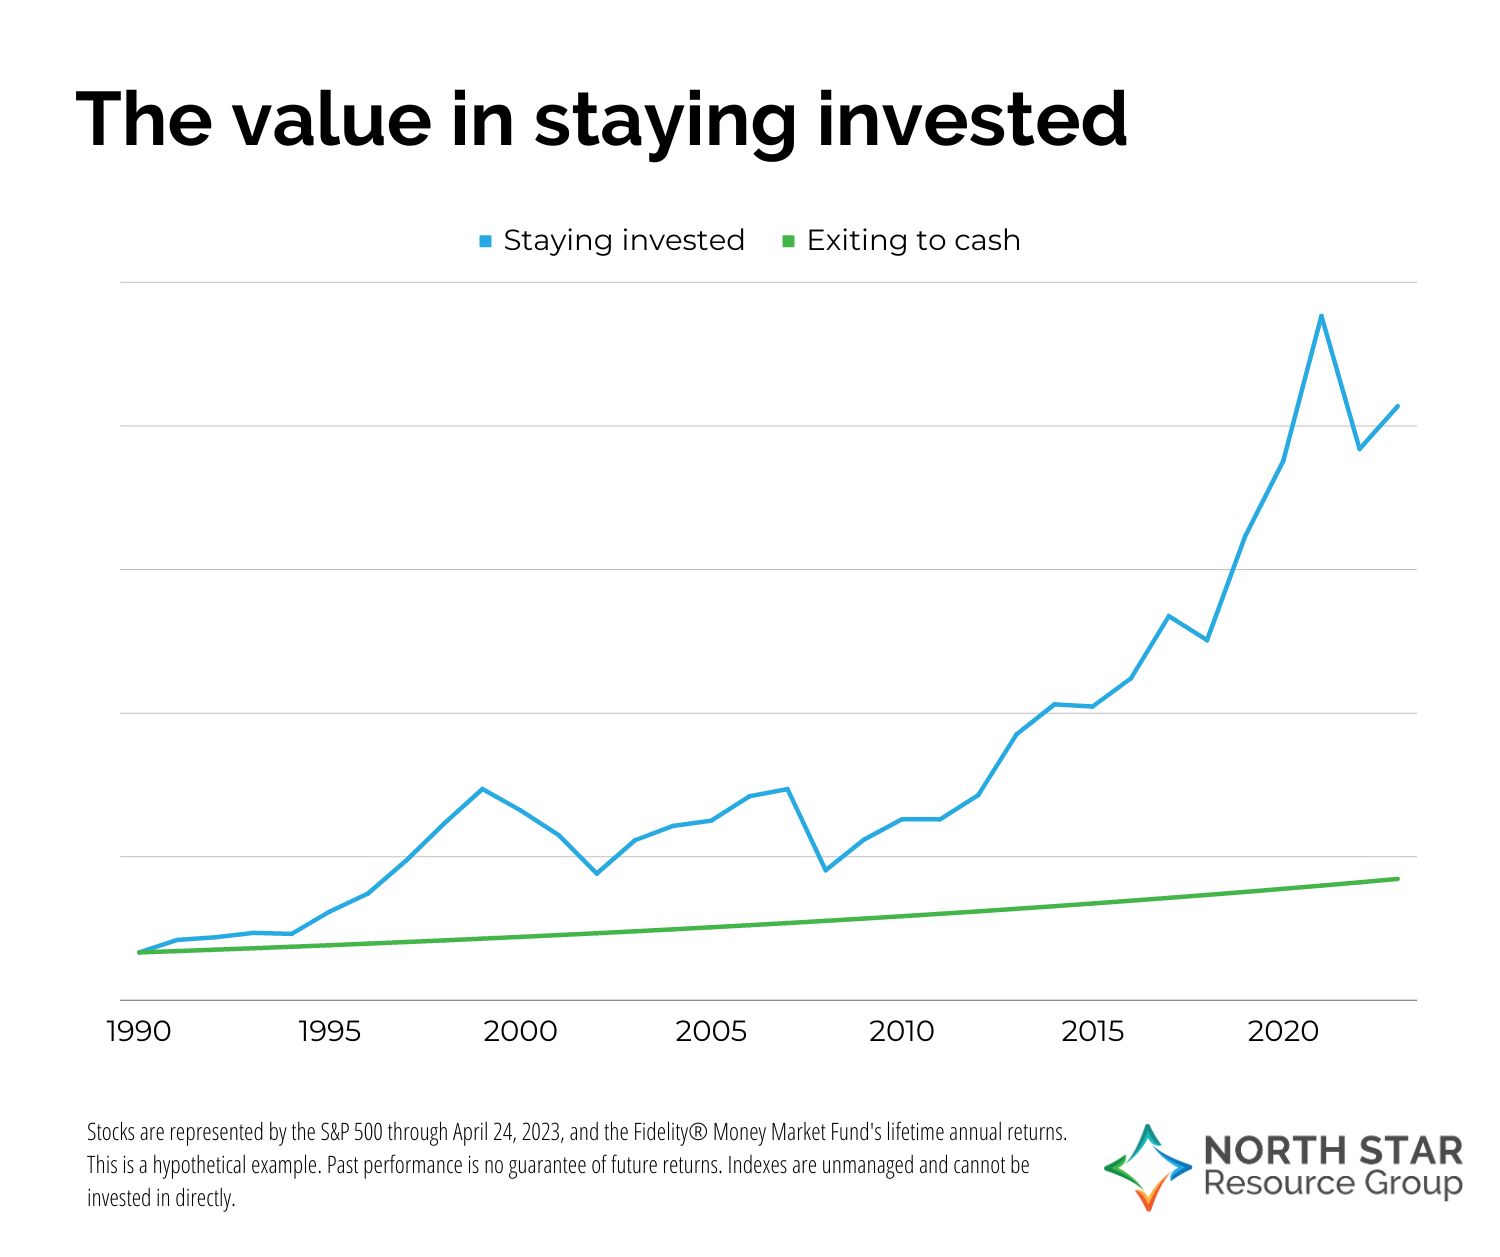 The value of stayin invested versus exiting to cash